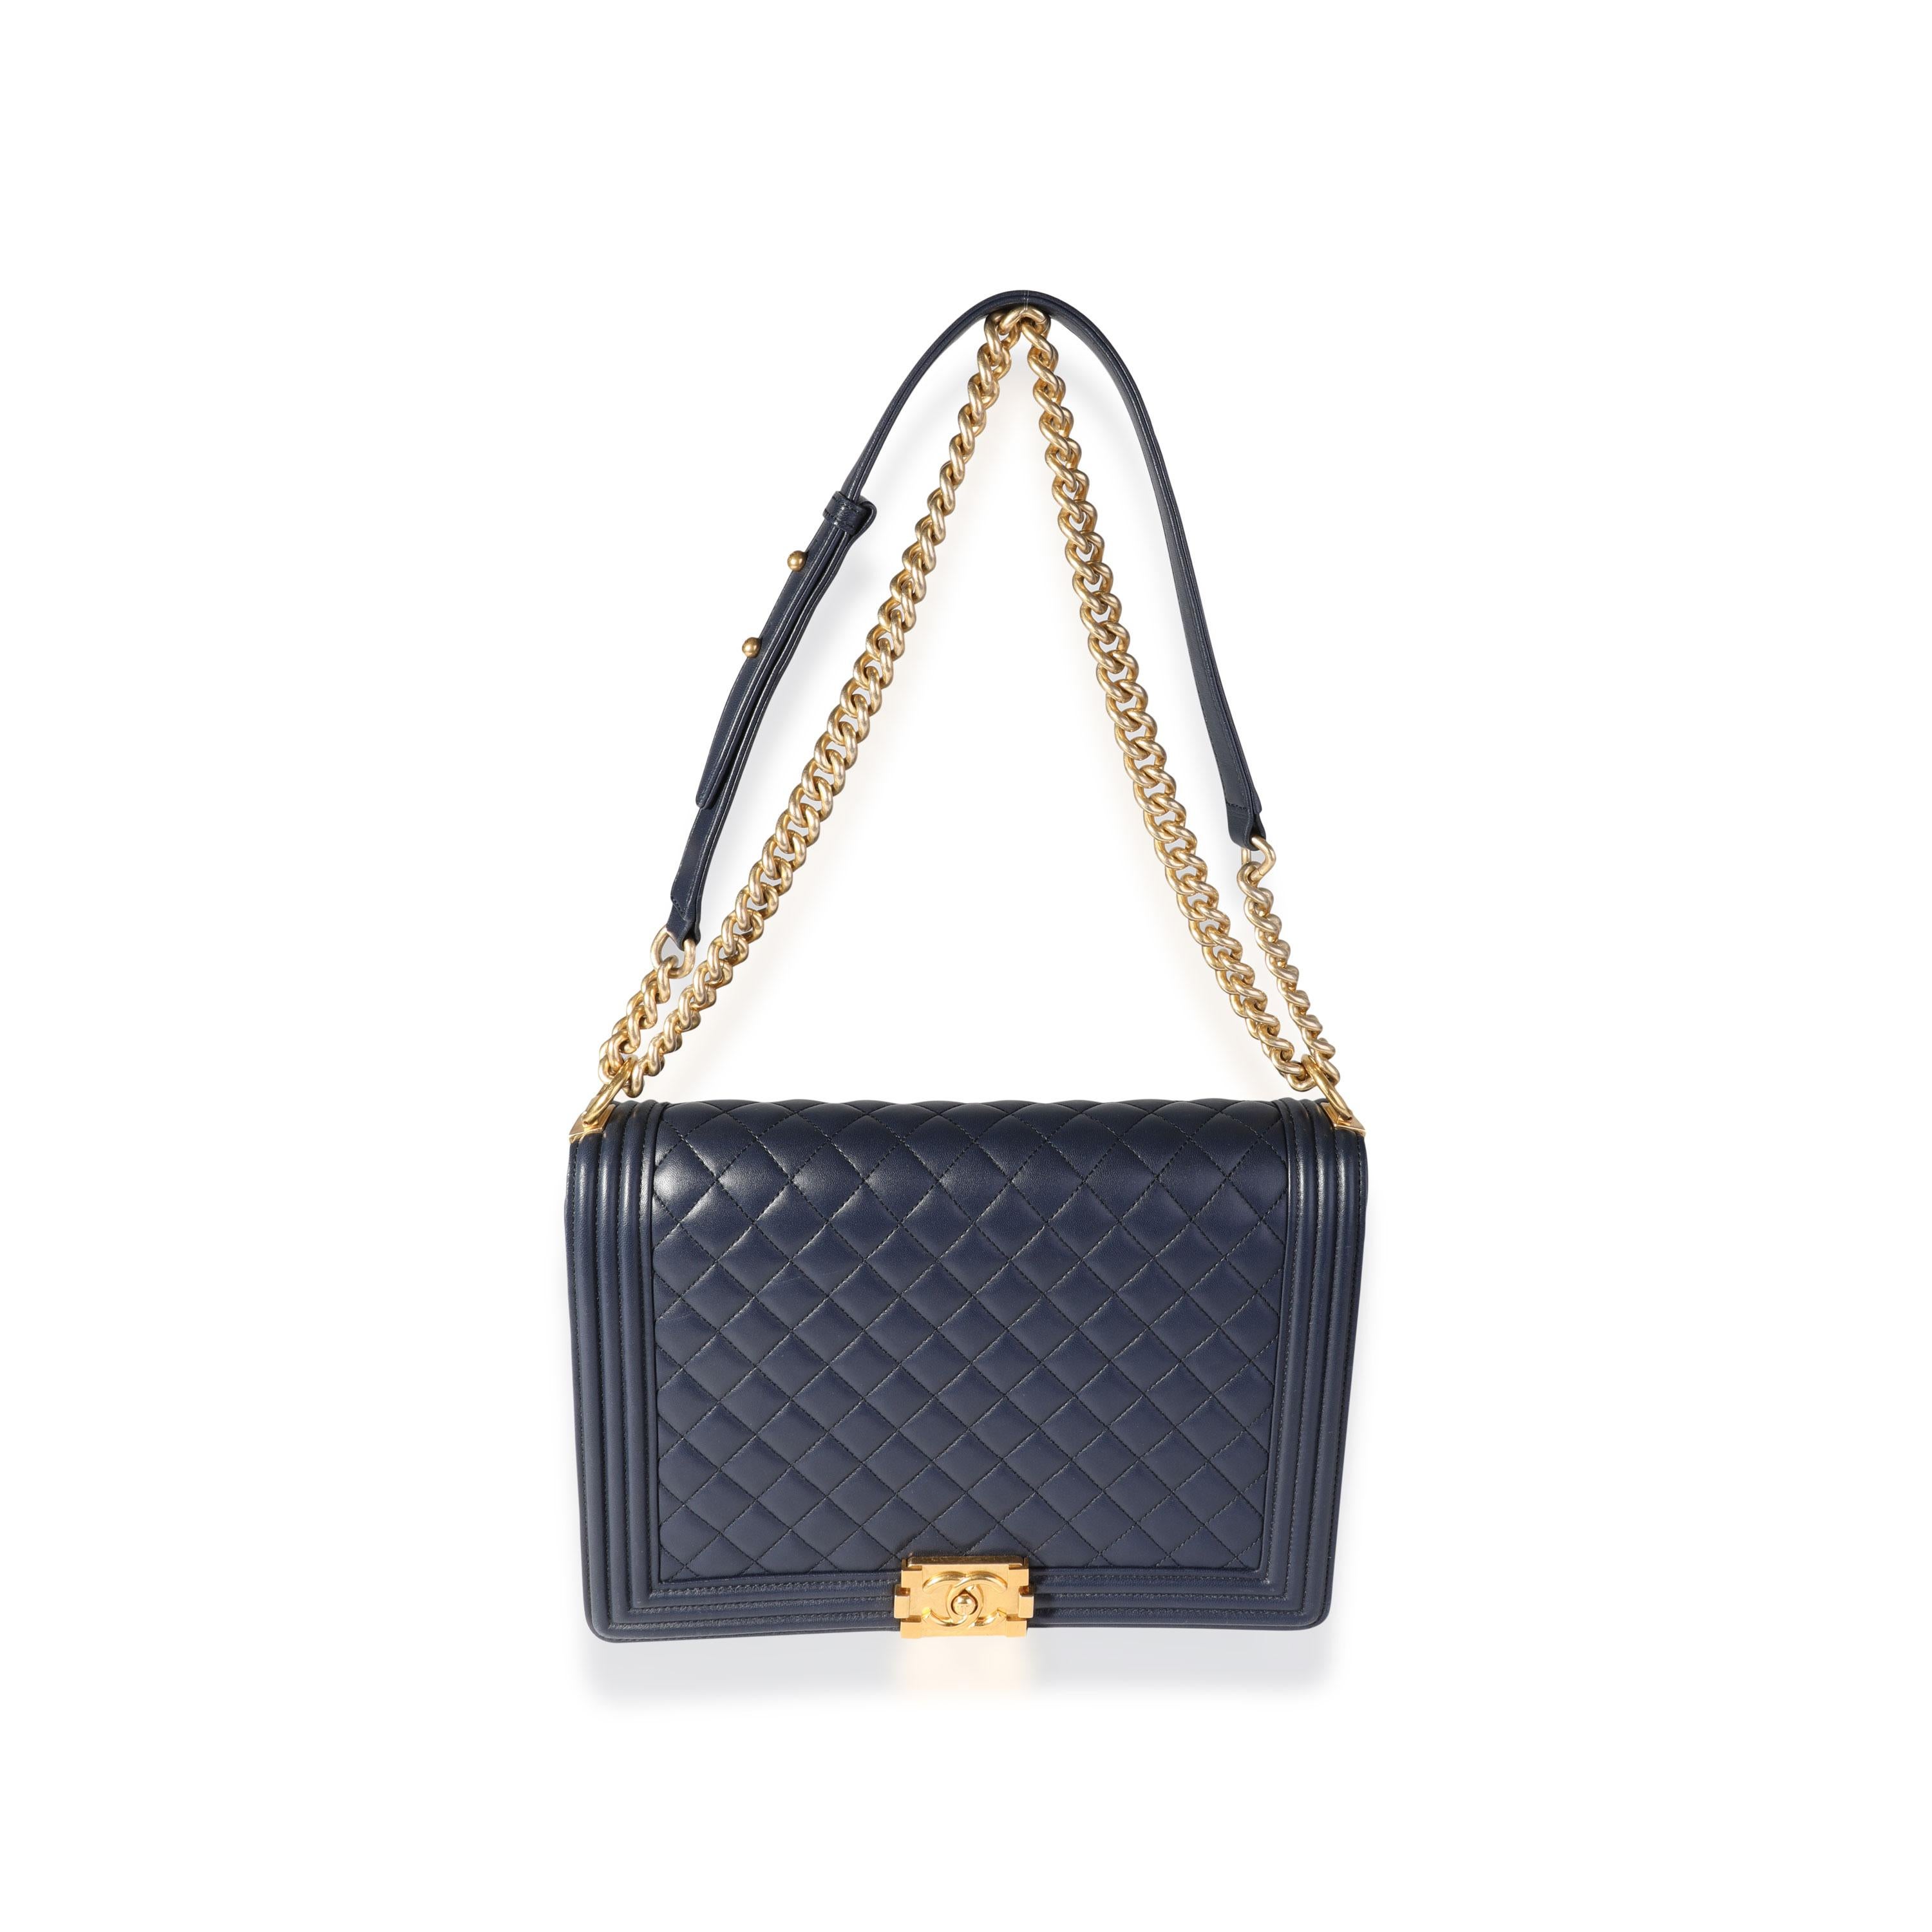 Listing Title: Chanel Navy Quilted Lambskin Large Boy Bag
SKU: 118812
Condition: Pre-owned (3000)
Handbag Condition: Very Good
Condition Comments: Wear to corners. Scratches on interior.
Brand: Chanel
Origin Country: Italy
Handbag Silhouette: